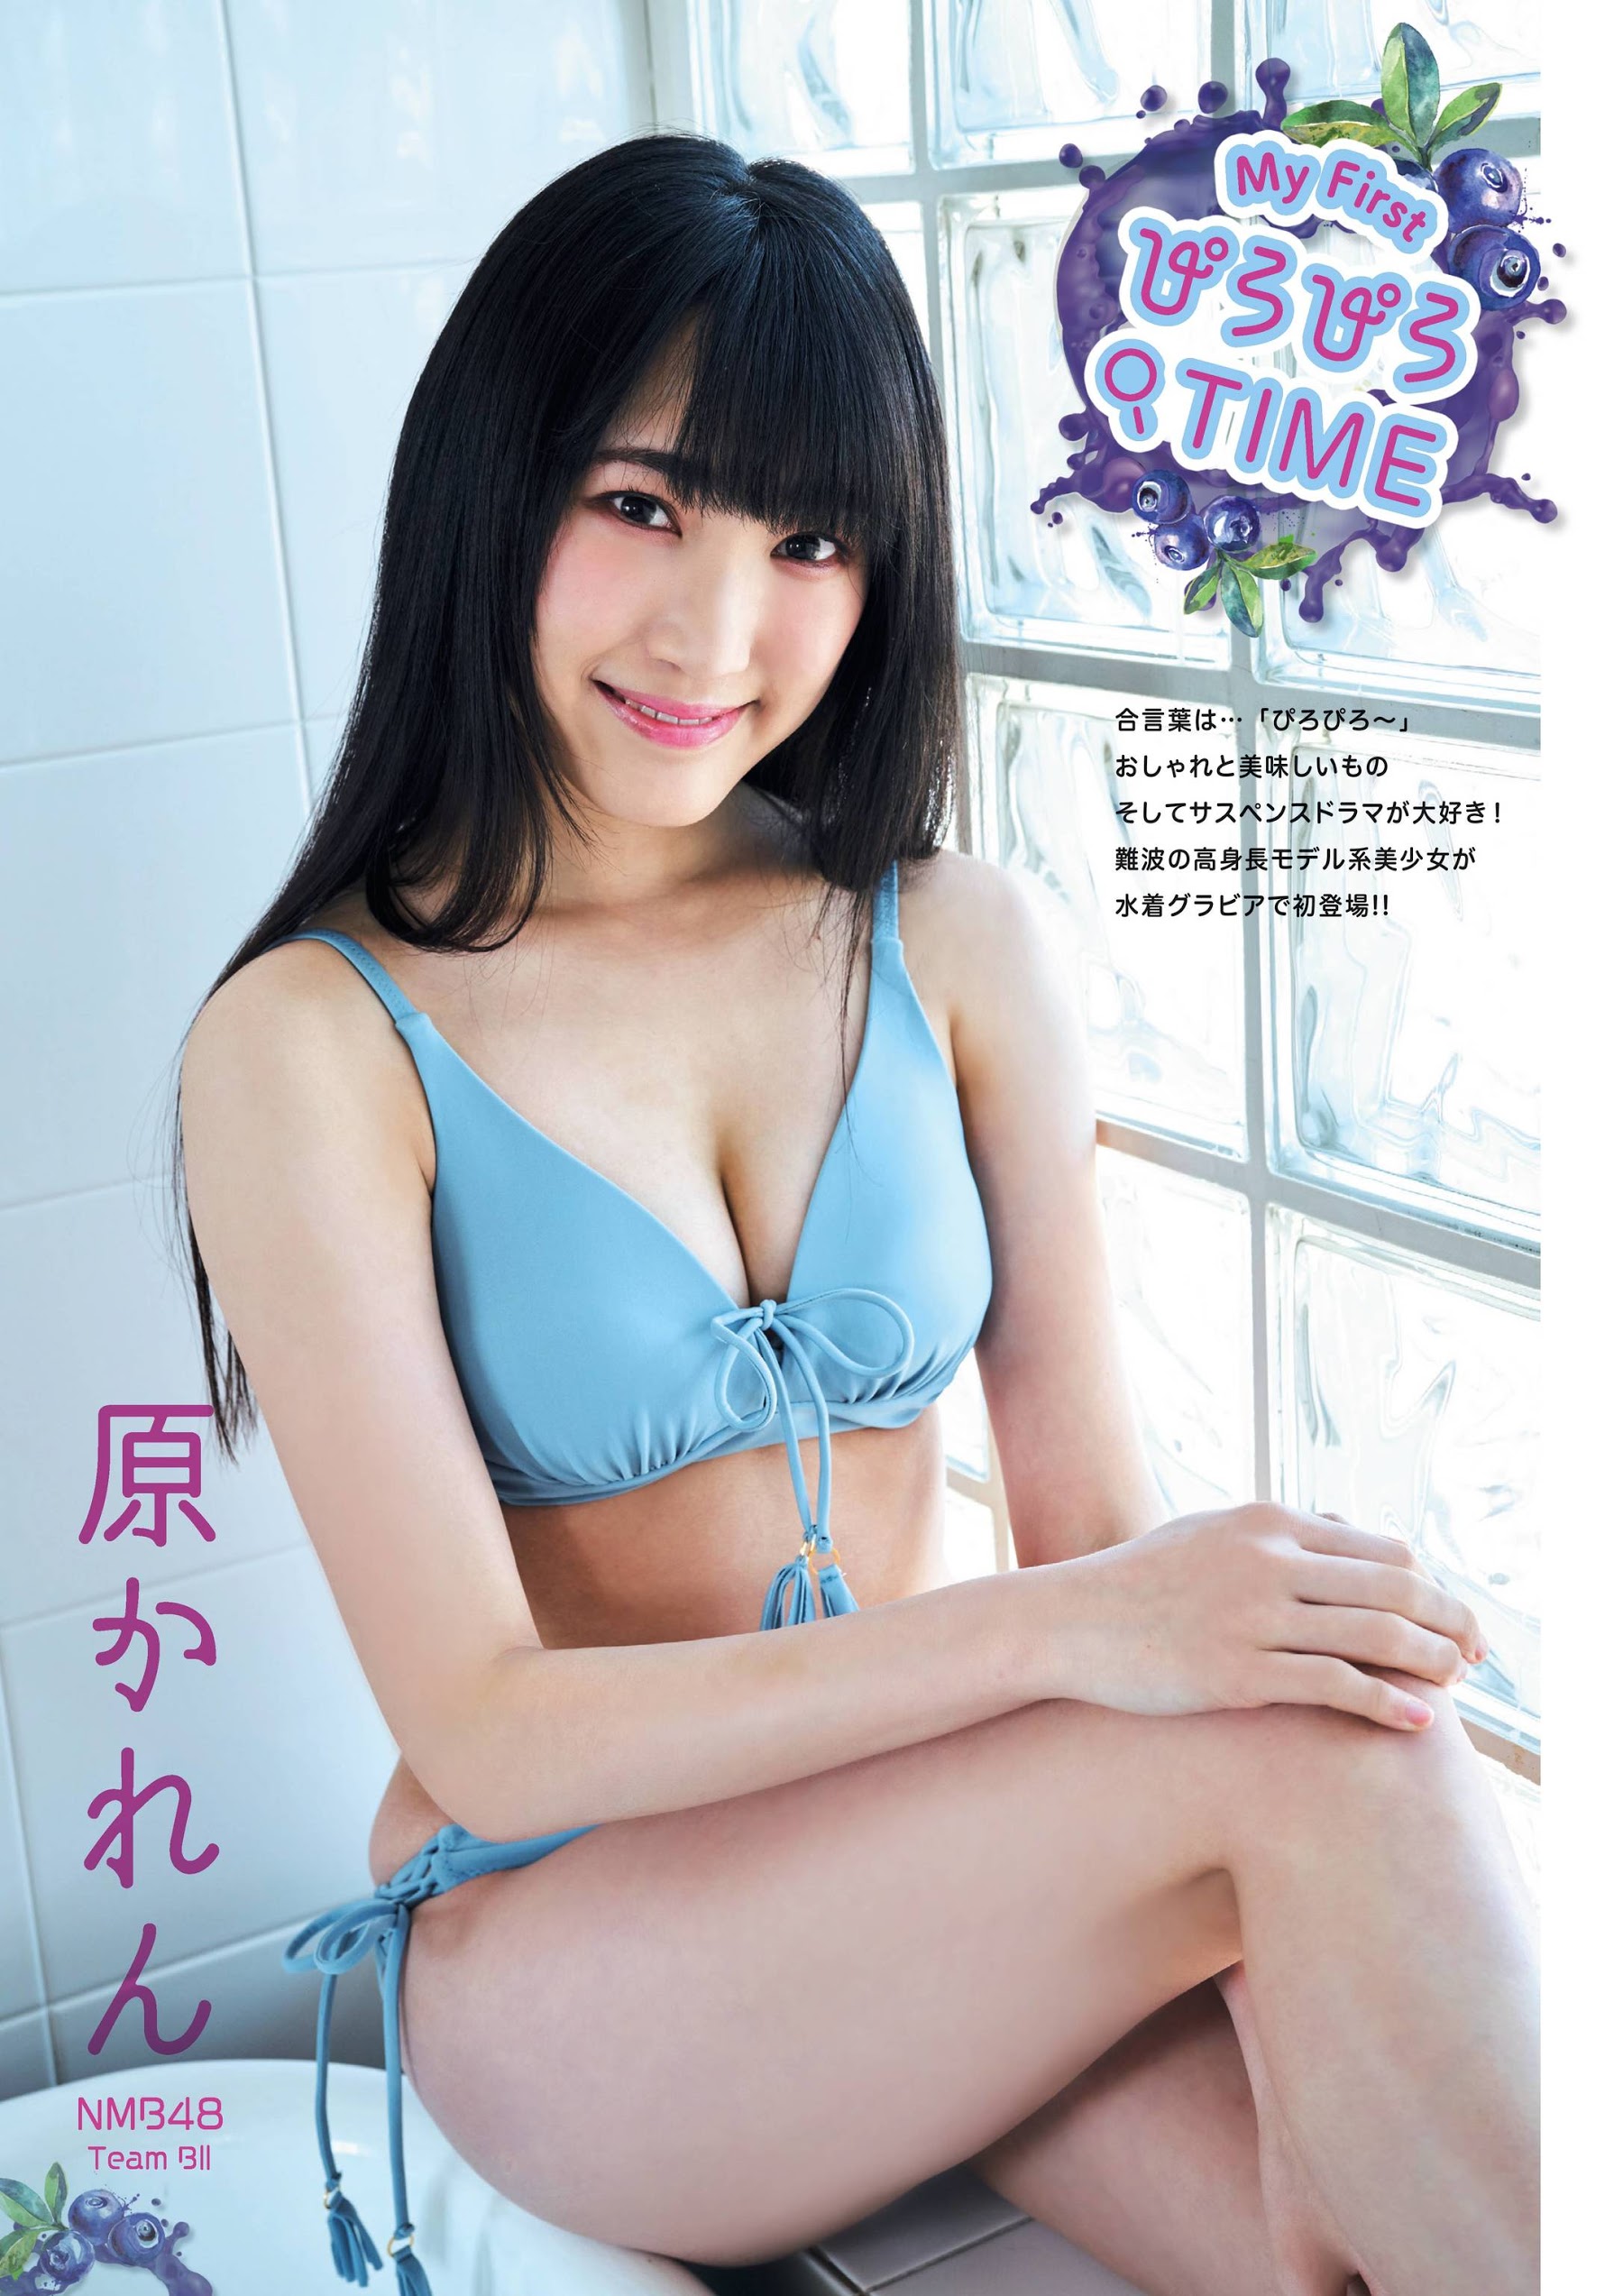 He has a mottoI love fashion good foodand suspense drama Nambas beautiful tall model girl is going to appear in swimsuit gravure Karin Hara 2020001